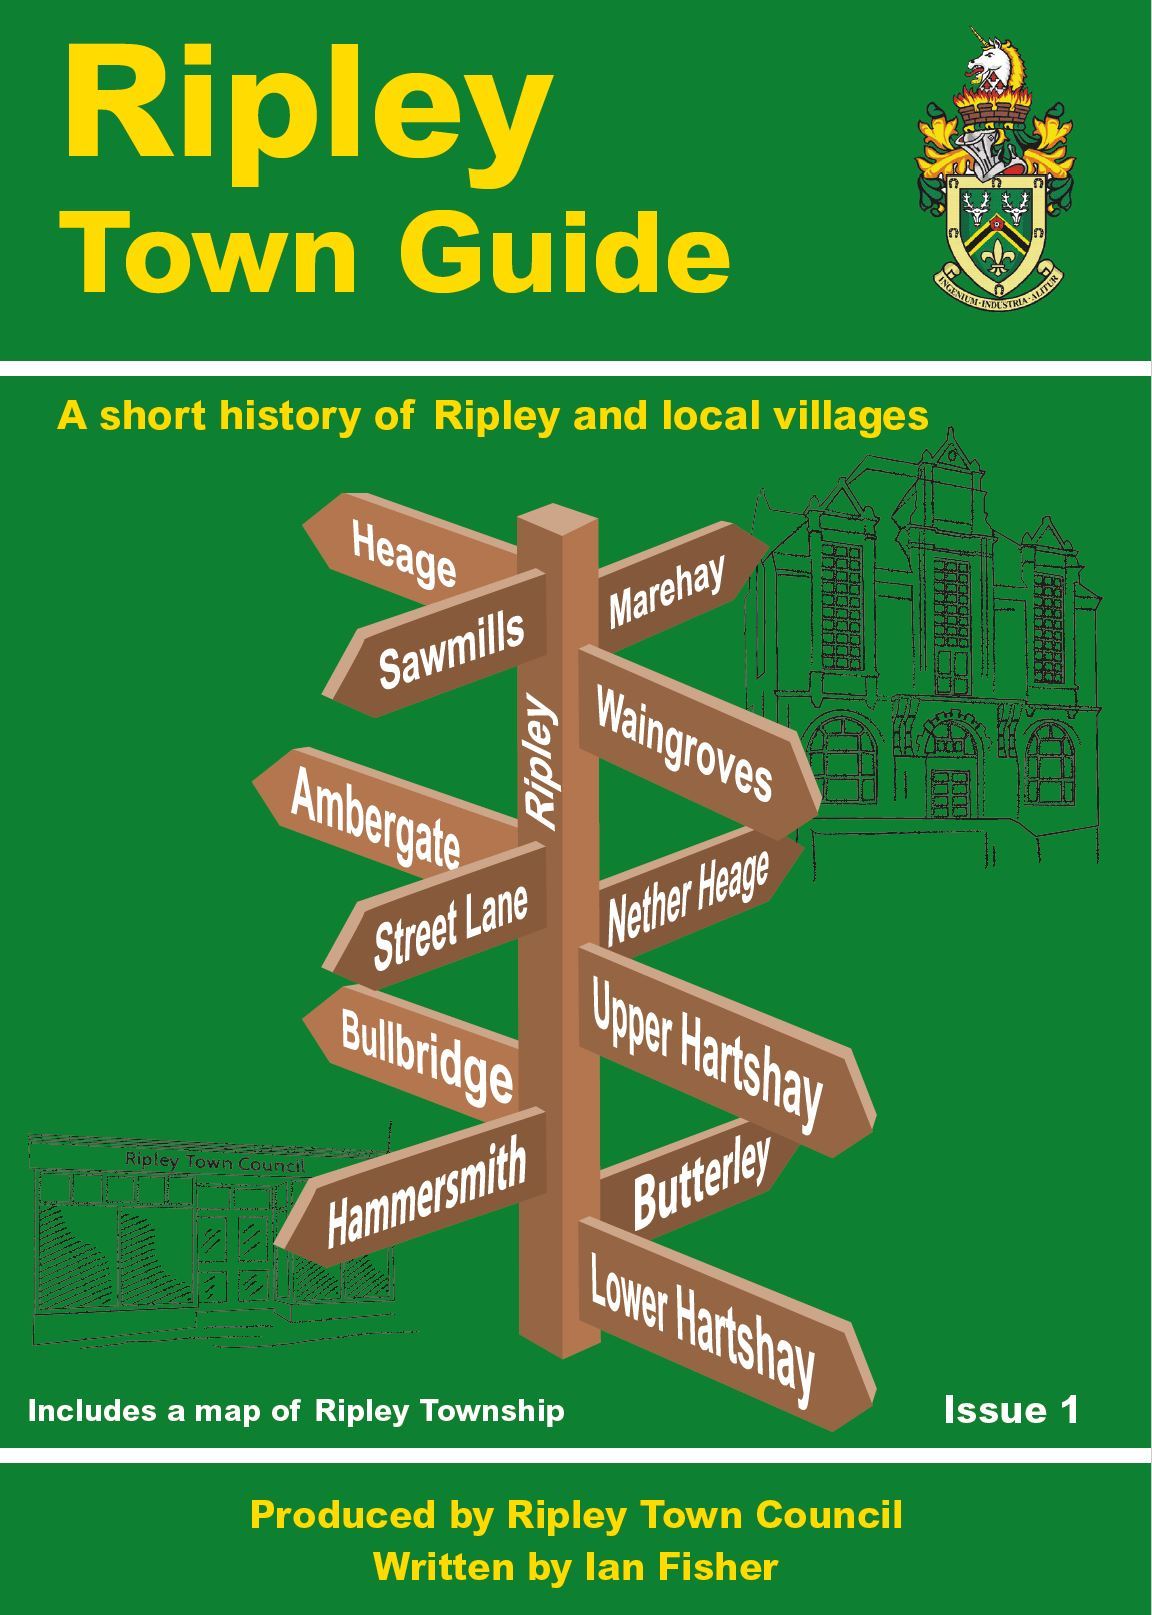 Ripley Town Guide